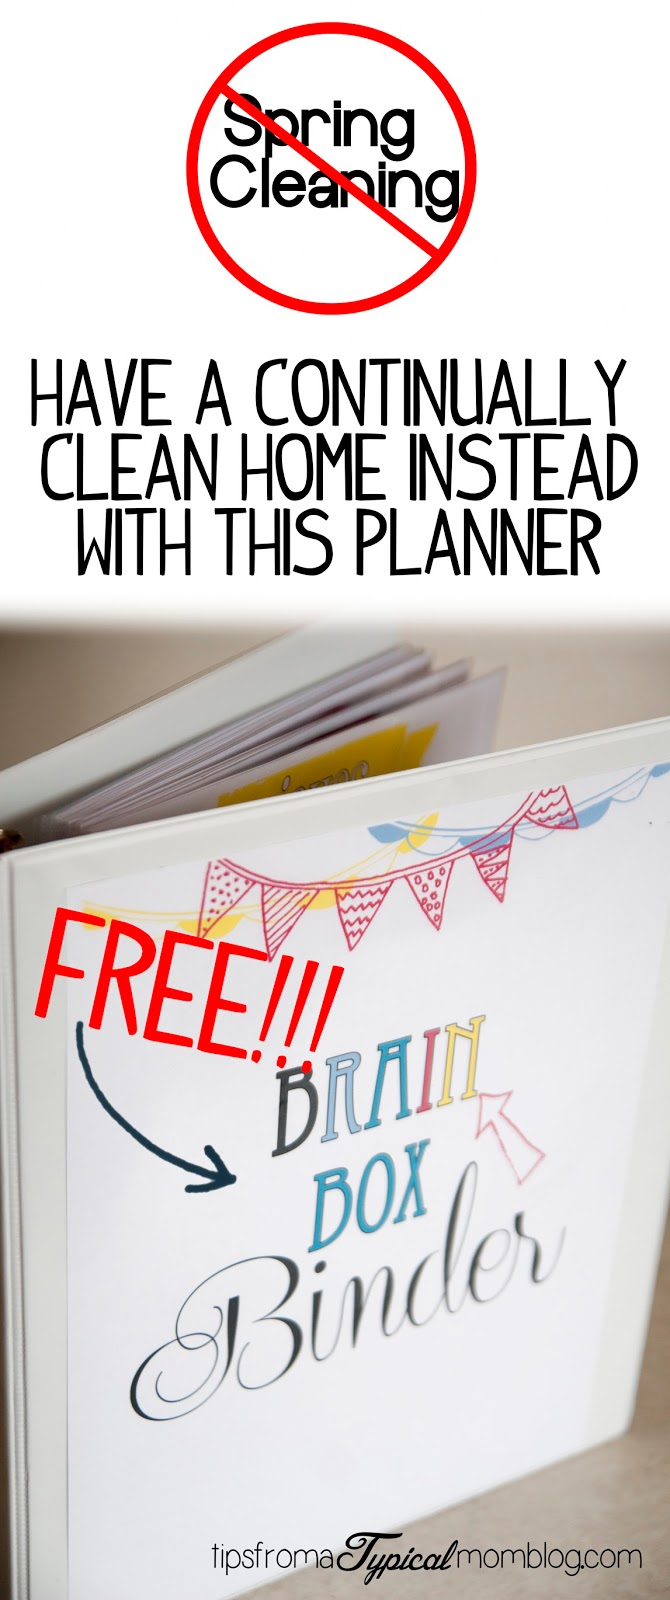 Just Say NO to Spring Cleaning and have a continually clean home all year round using this "Brain Box" binder from Tips From a Typical Mom.